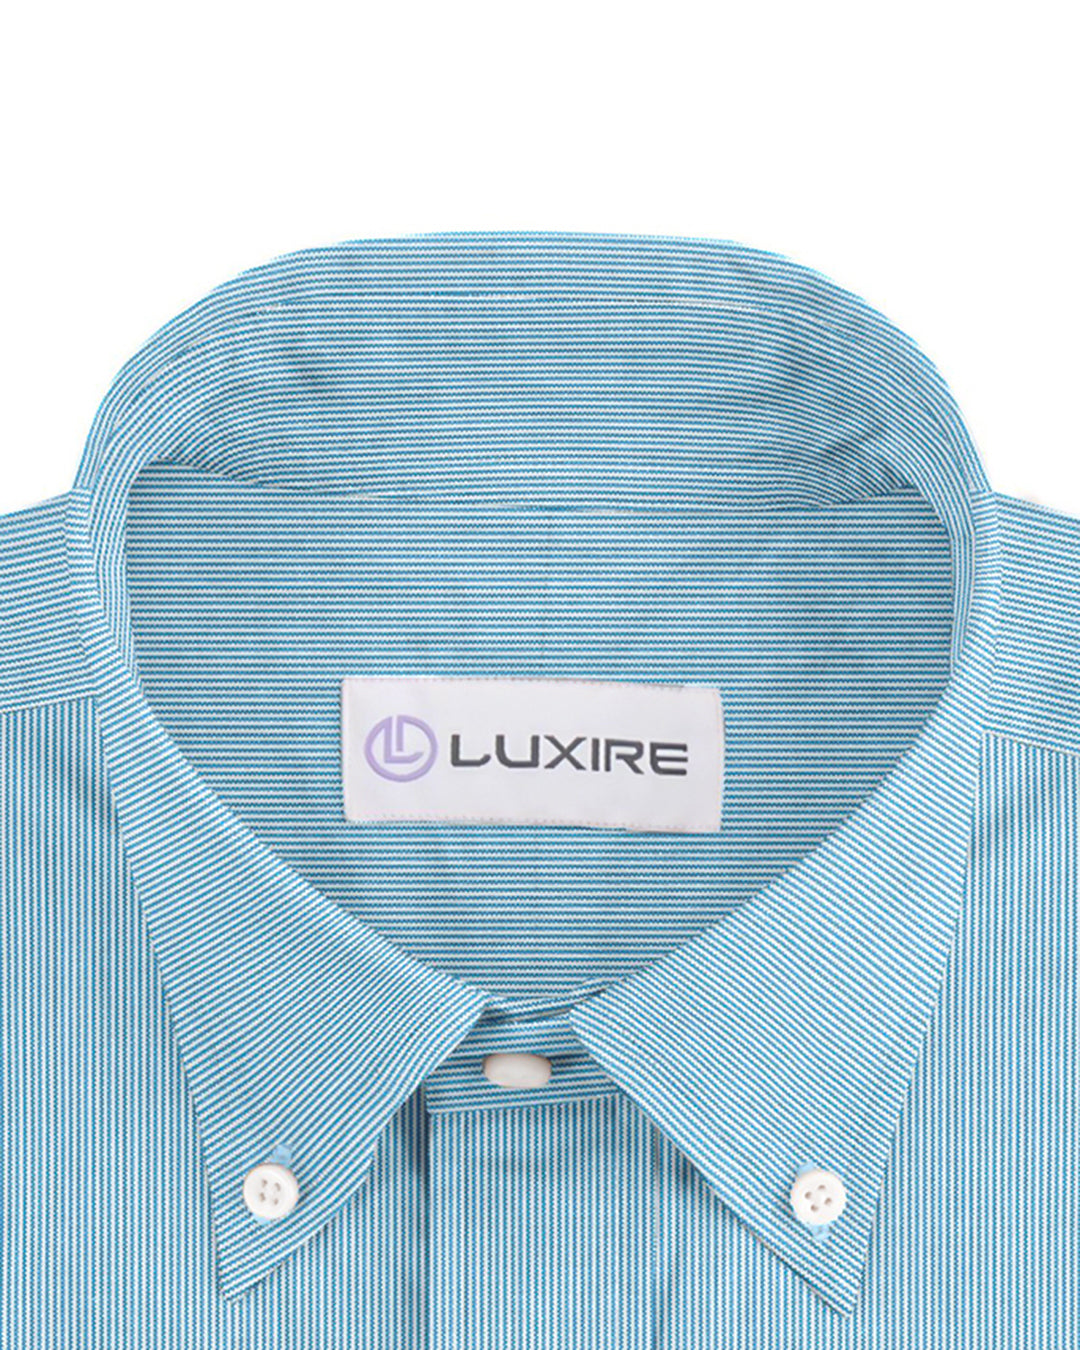 Collar of the custom linen shirt for men in candy blue by Luxire Clothing